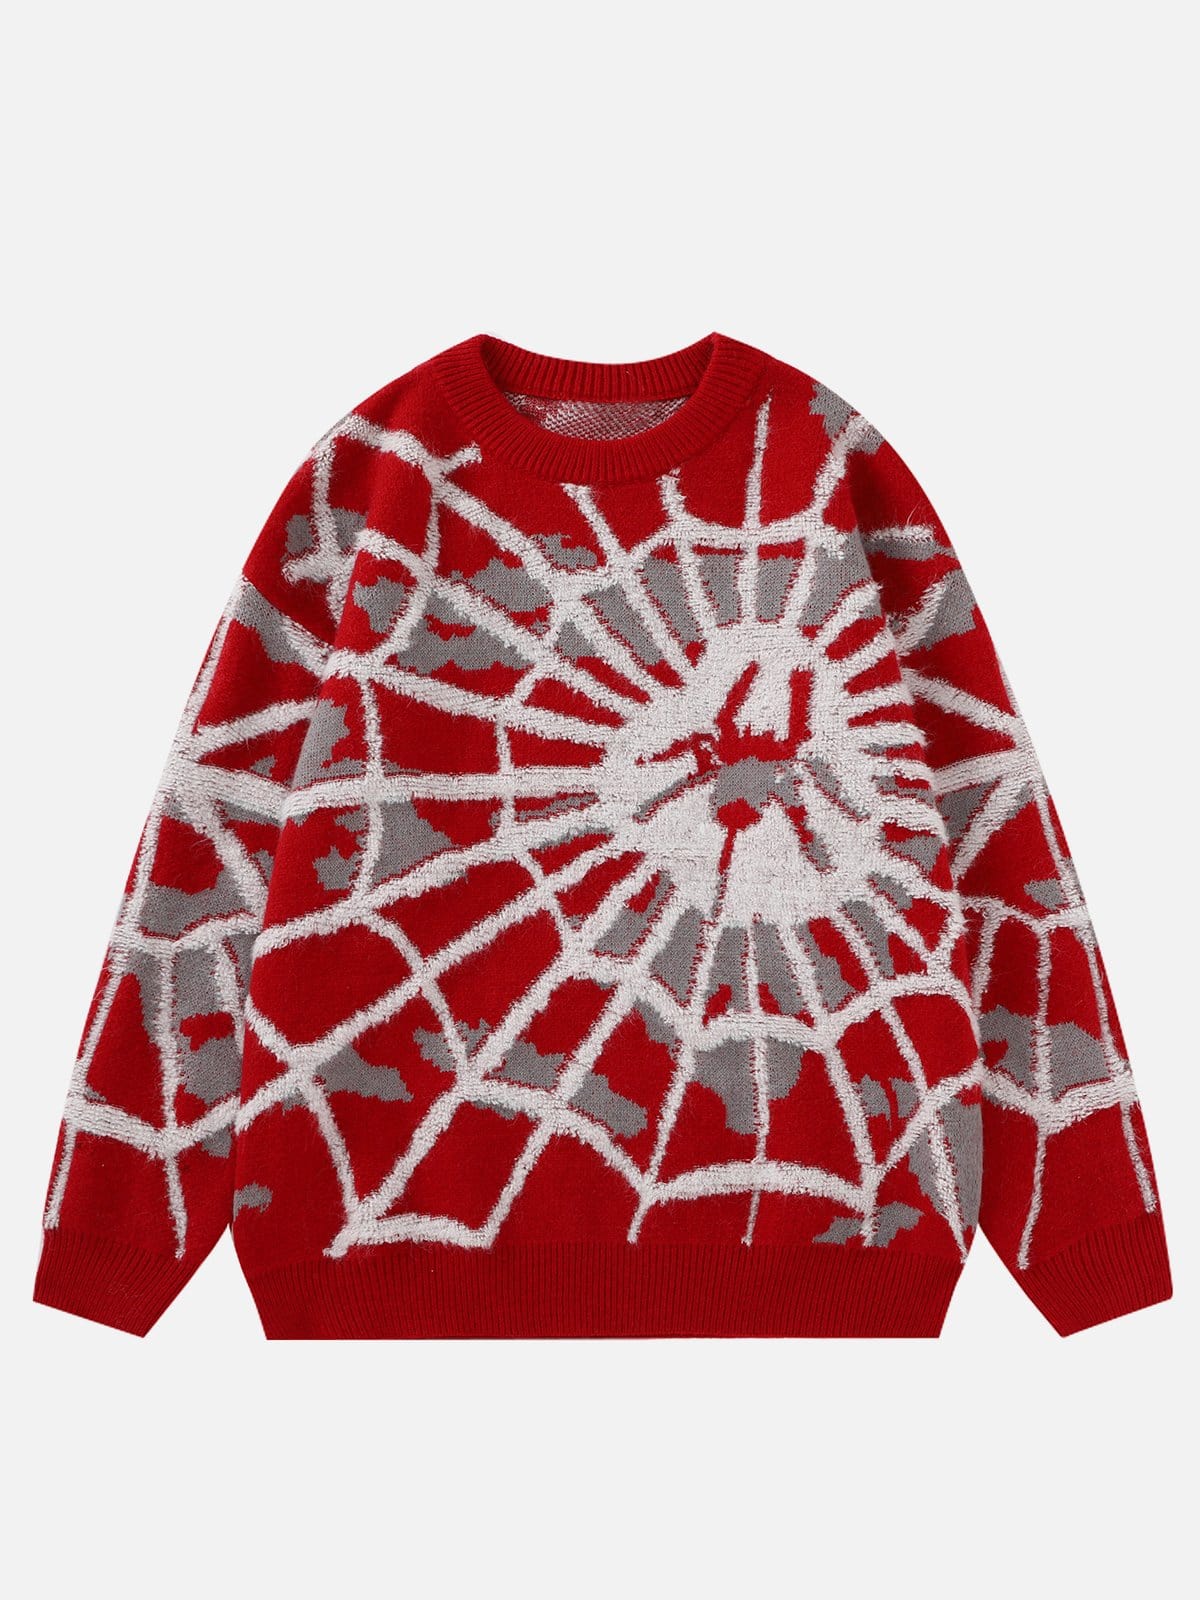 NEV Fleece Spider Web Crafted Sweater